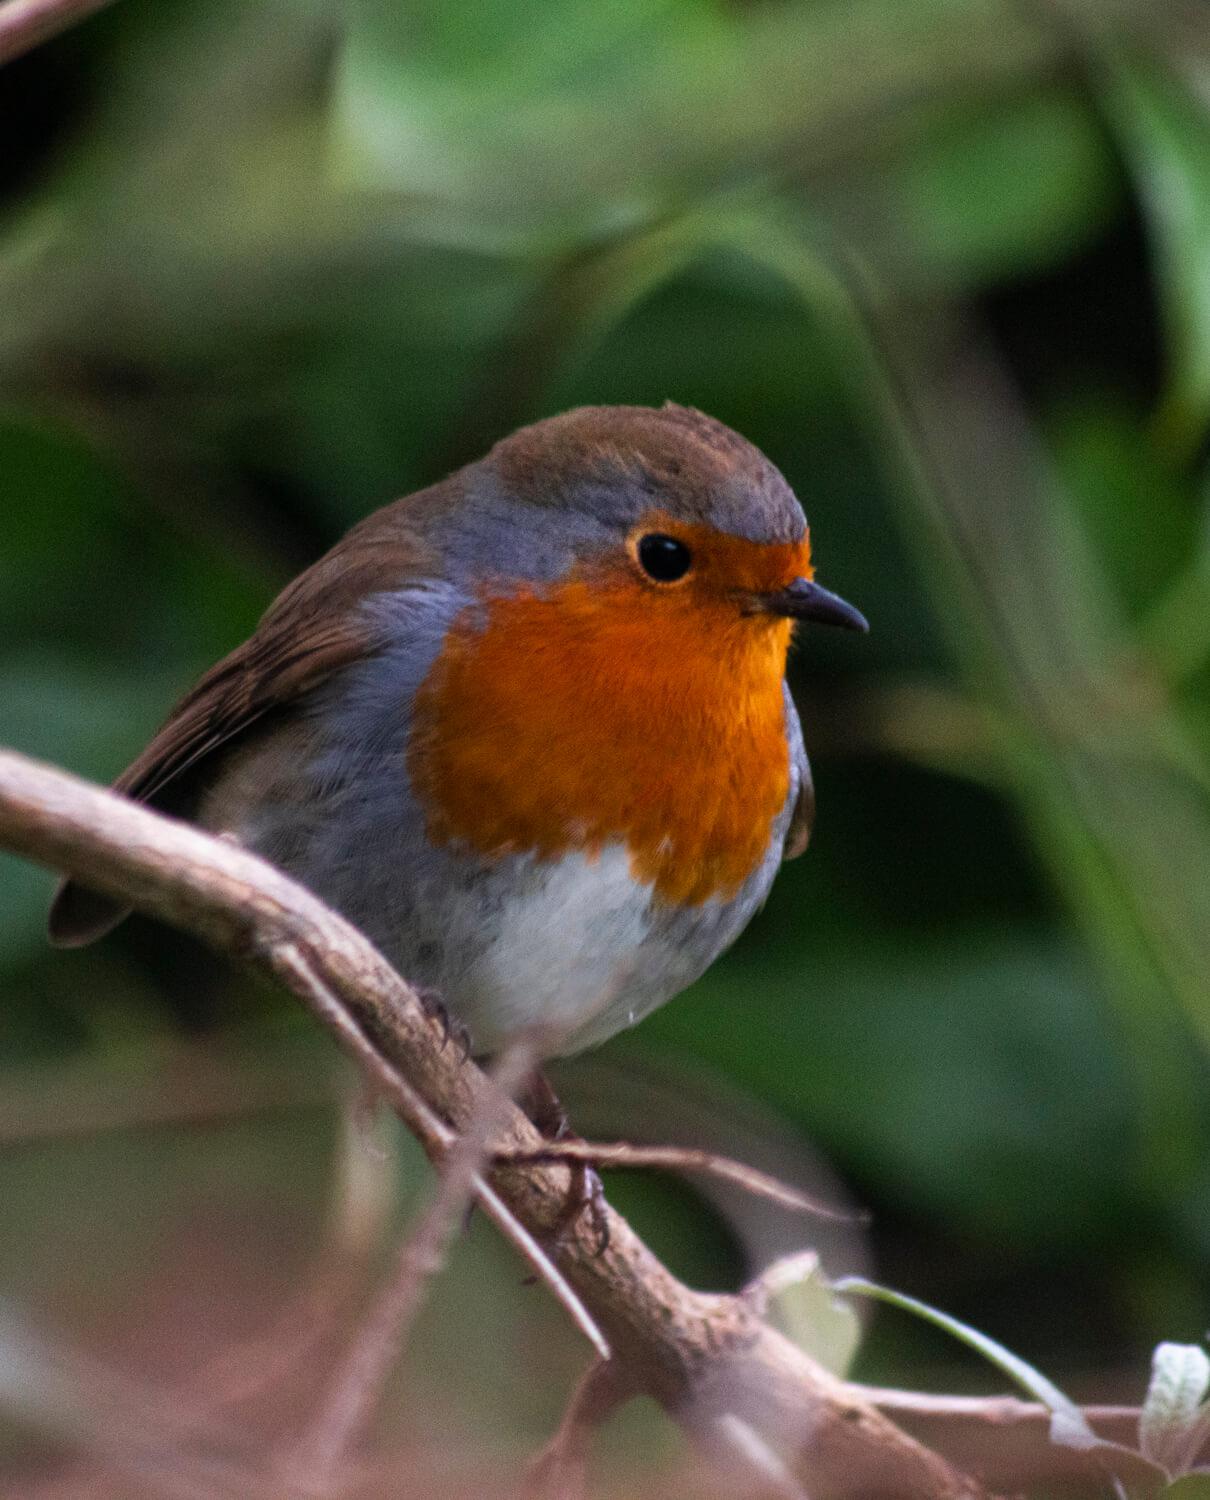 A robin perched on a branch